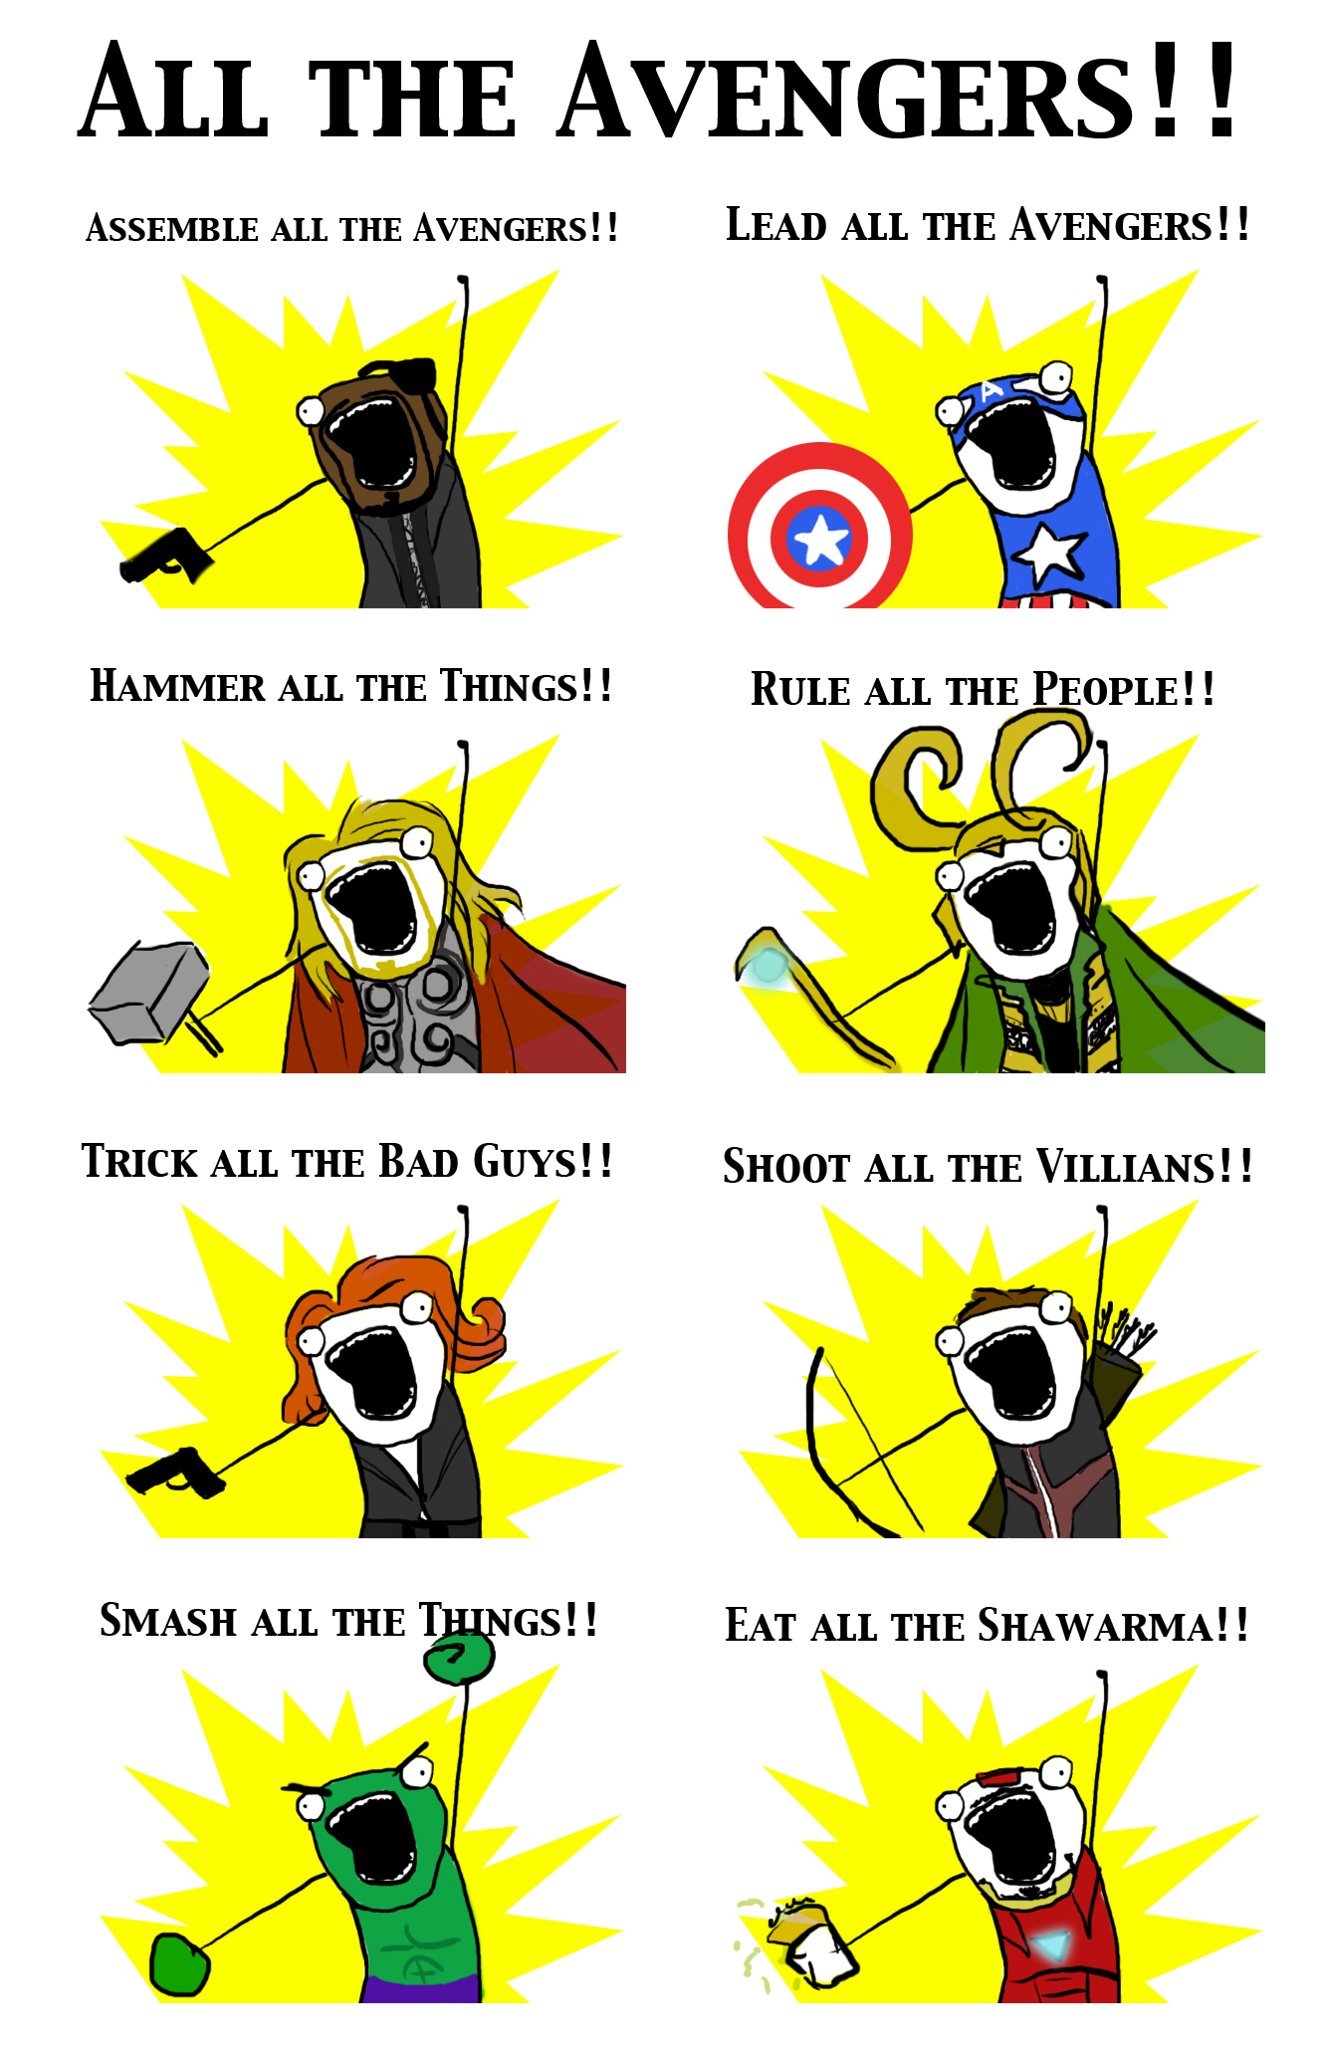 ALL THE AVENGERS